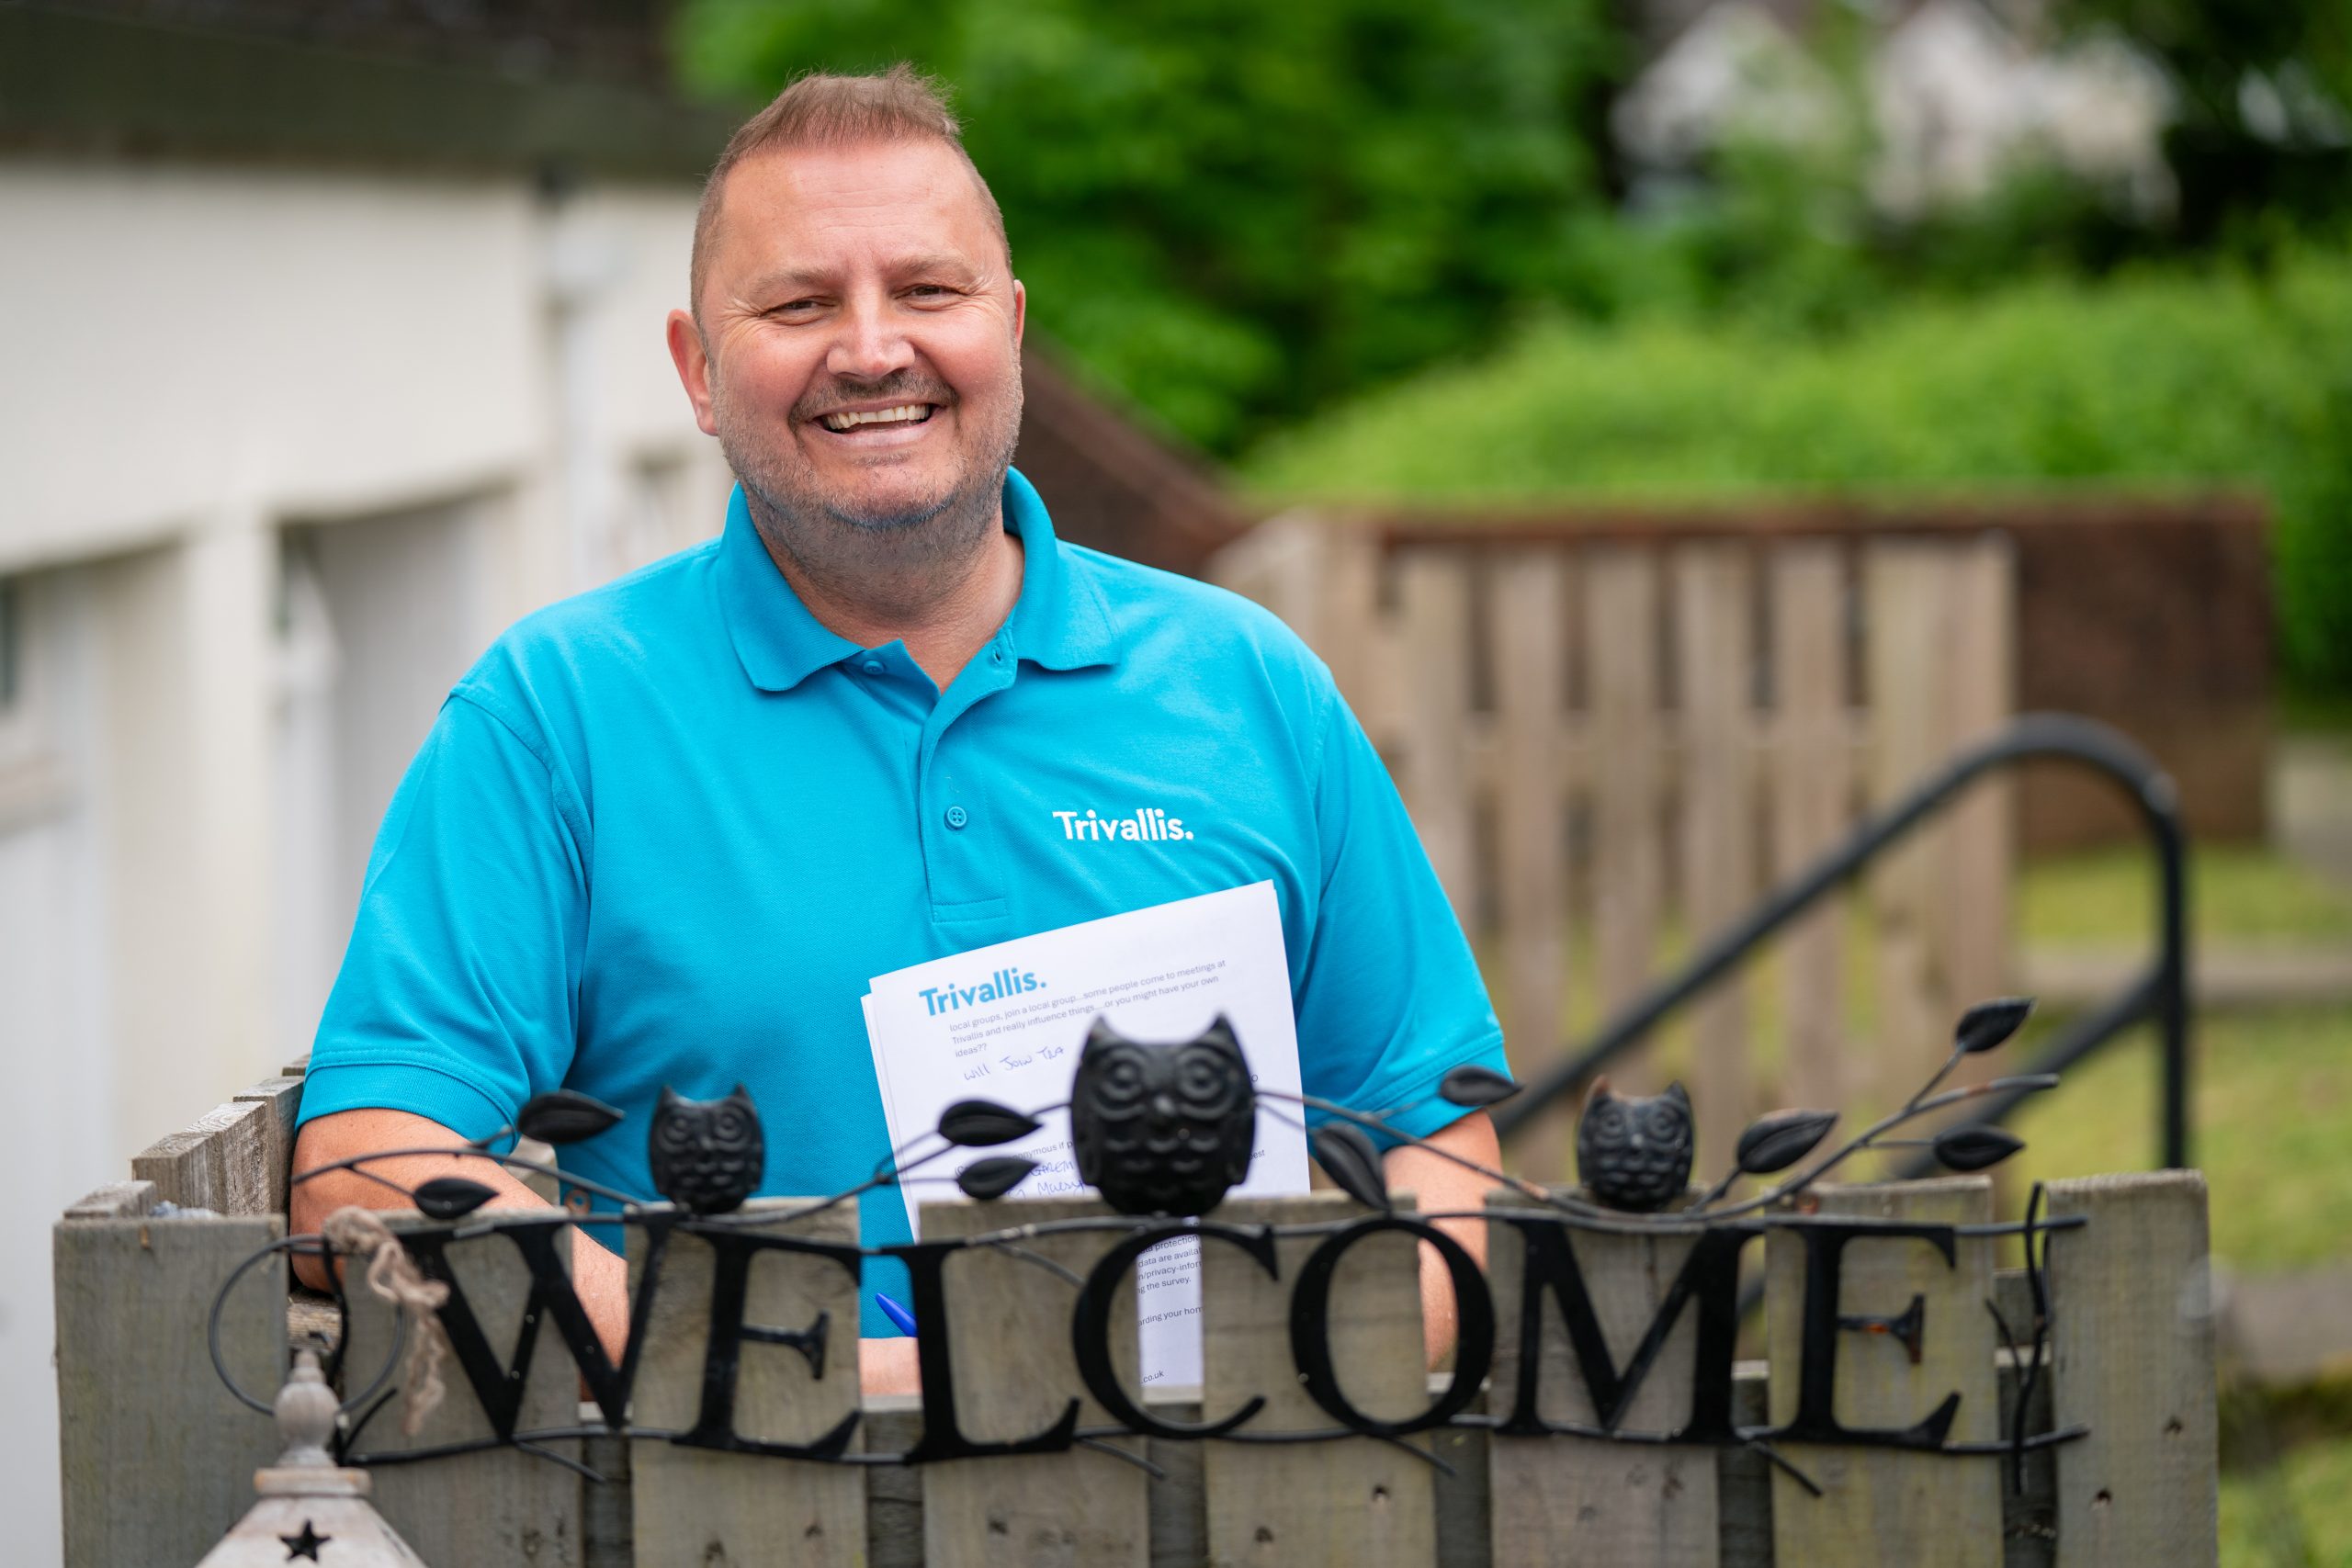 Trivallis Housing Landlord Wales A person in a blue shirt, holding a document, stands behind a decorative "WELCOME" sign featuring black owl figures. The person is smiling and appears to be in an outdoor setting with greenery and buildings in the background. The shirt has "Trivallis" printed on it.